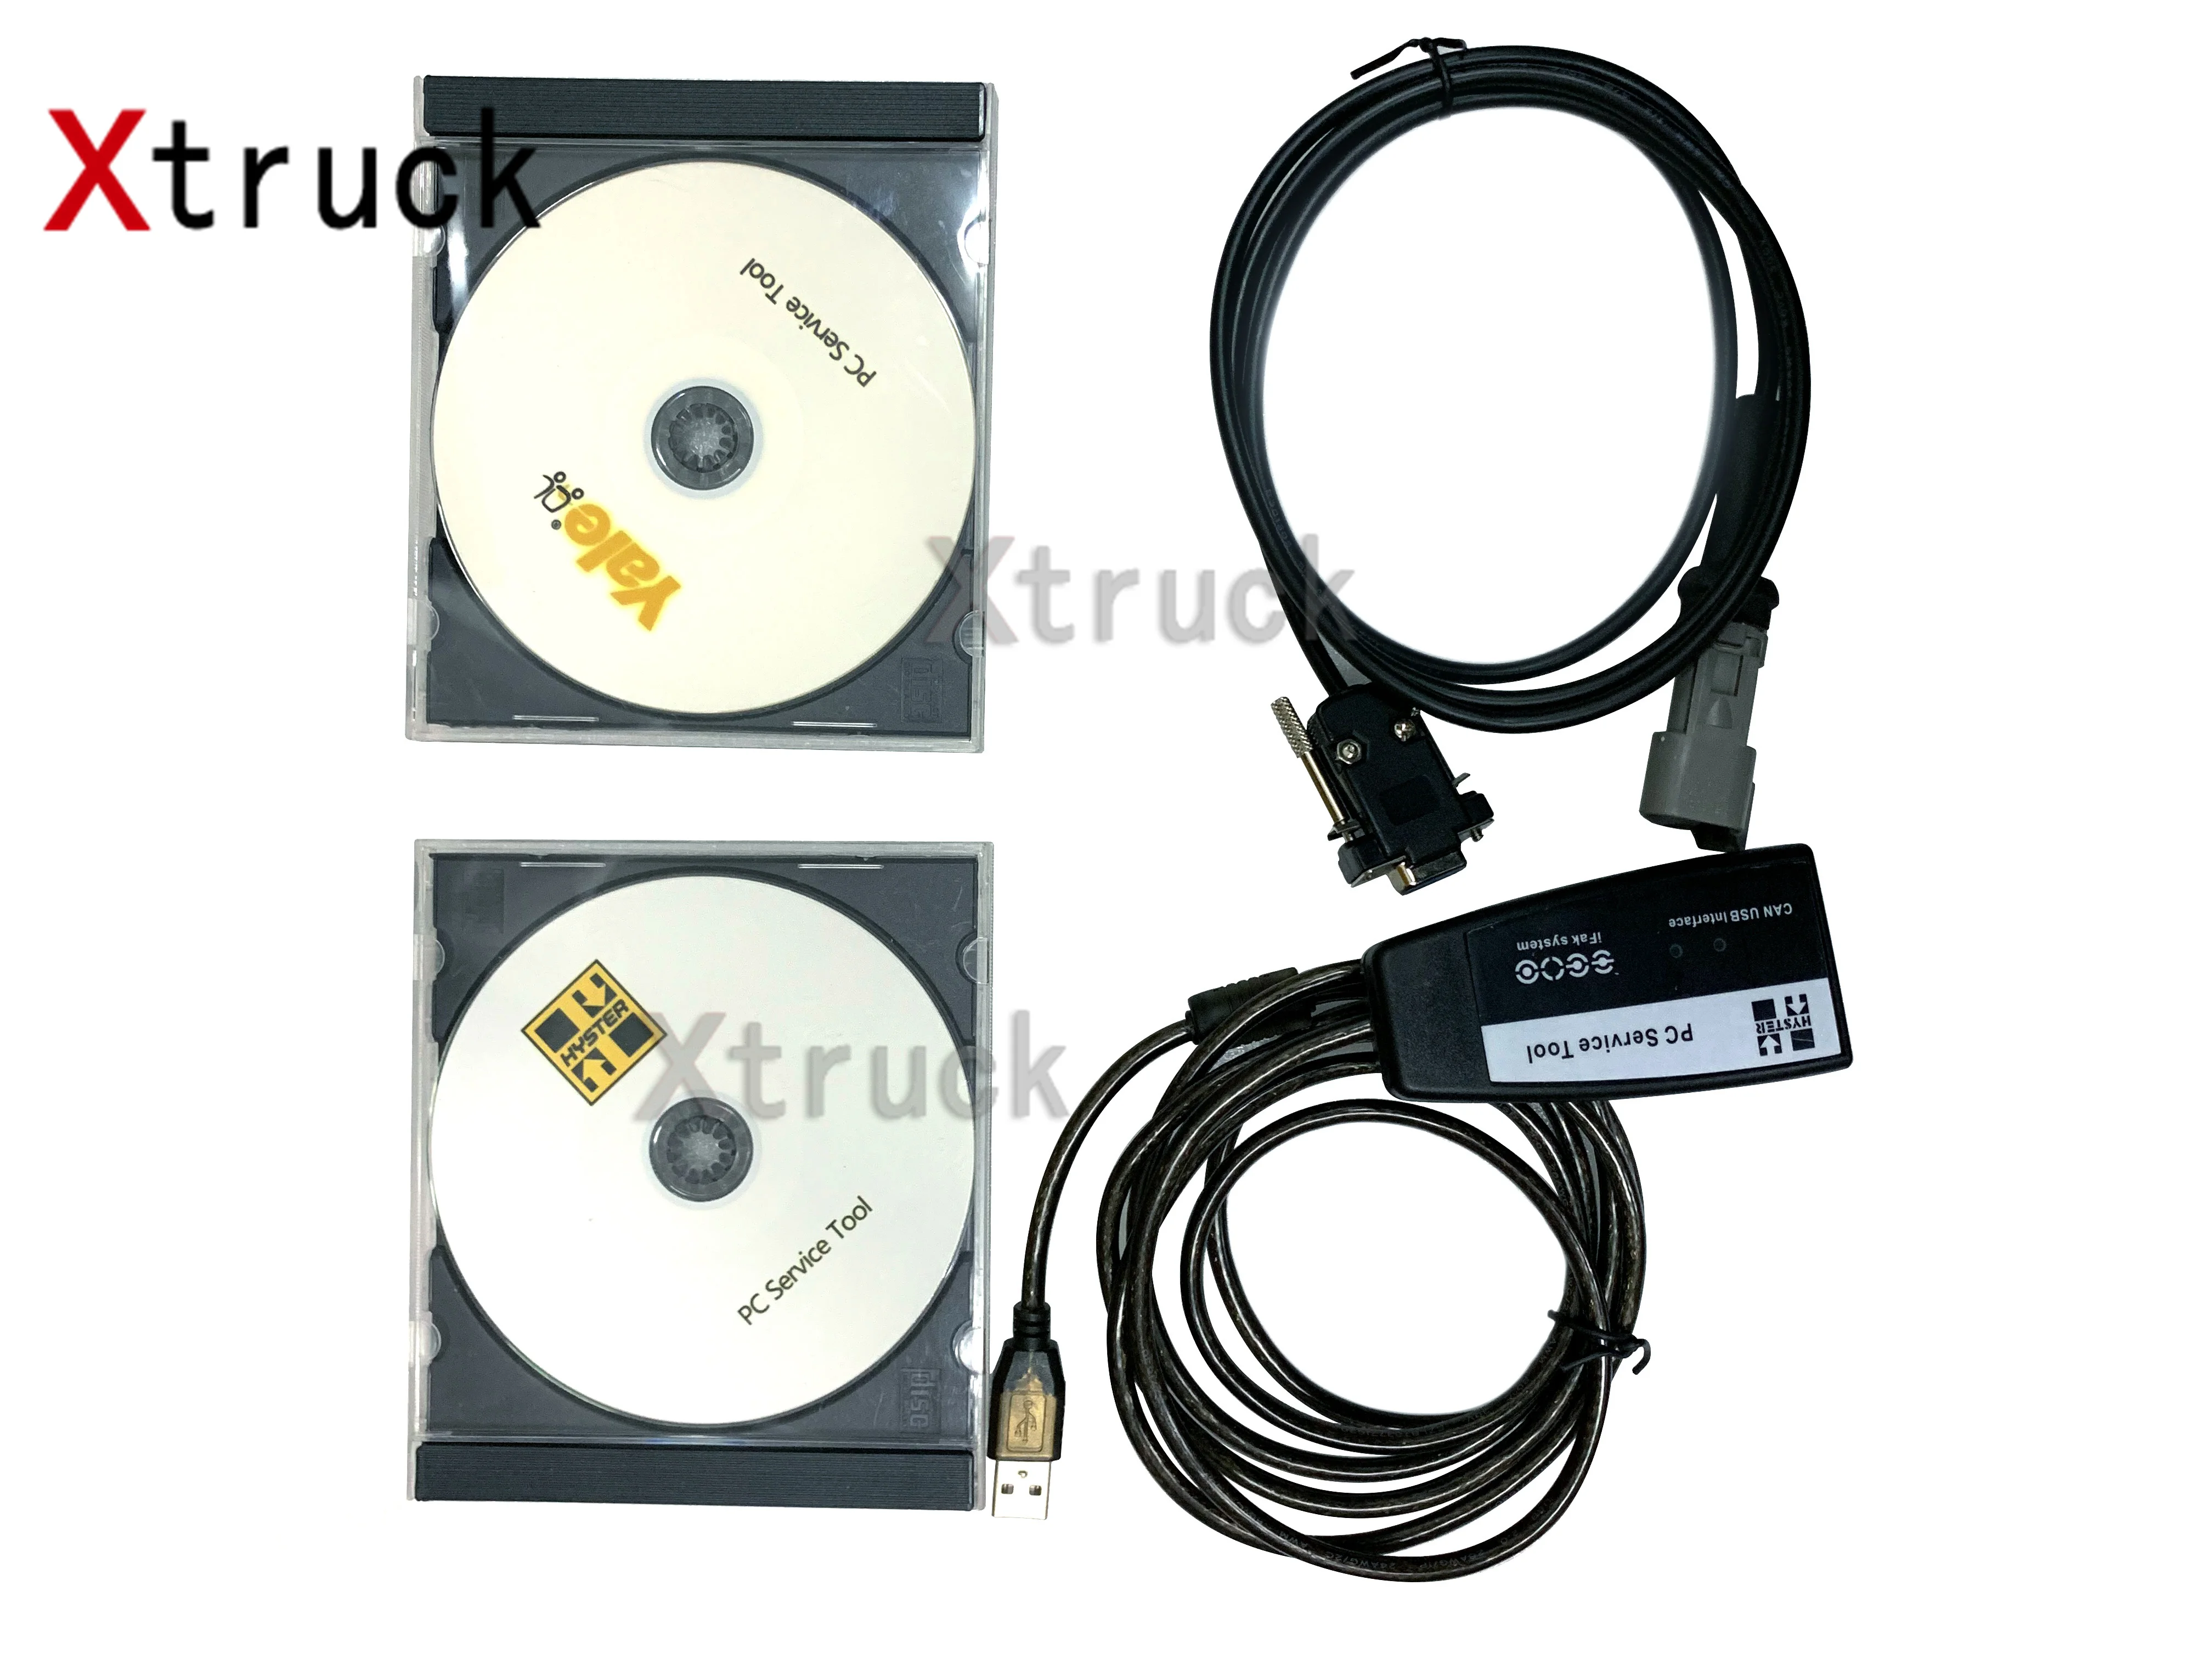 

For Hyster Yale Forklift diagnostic tool Ifak Can Usb Interface with Hyster Yale PC Servicel Tool V4.98